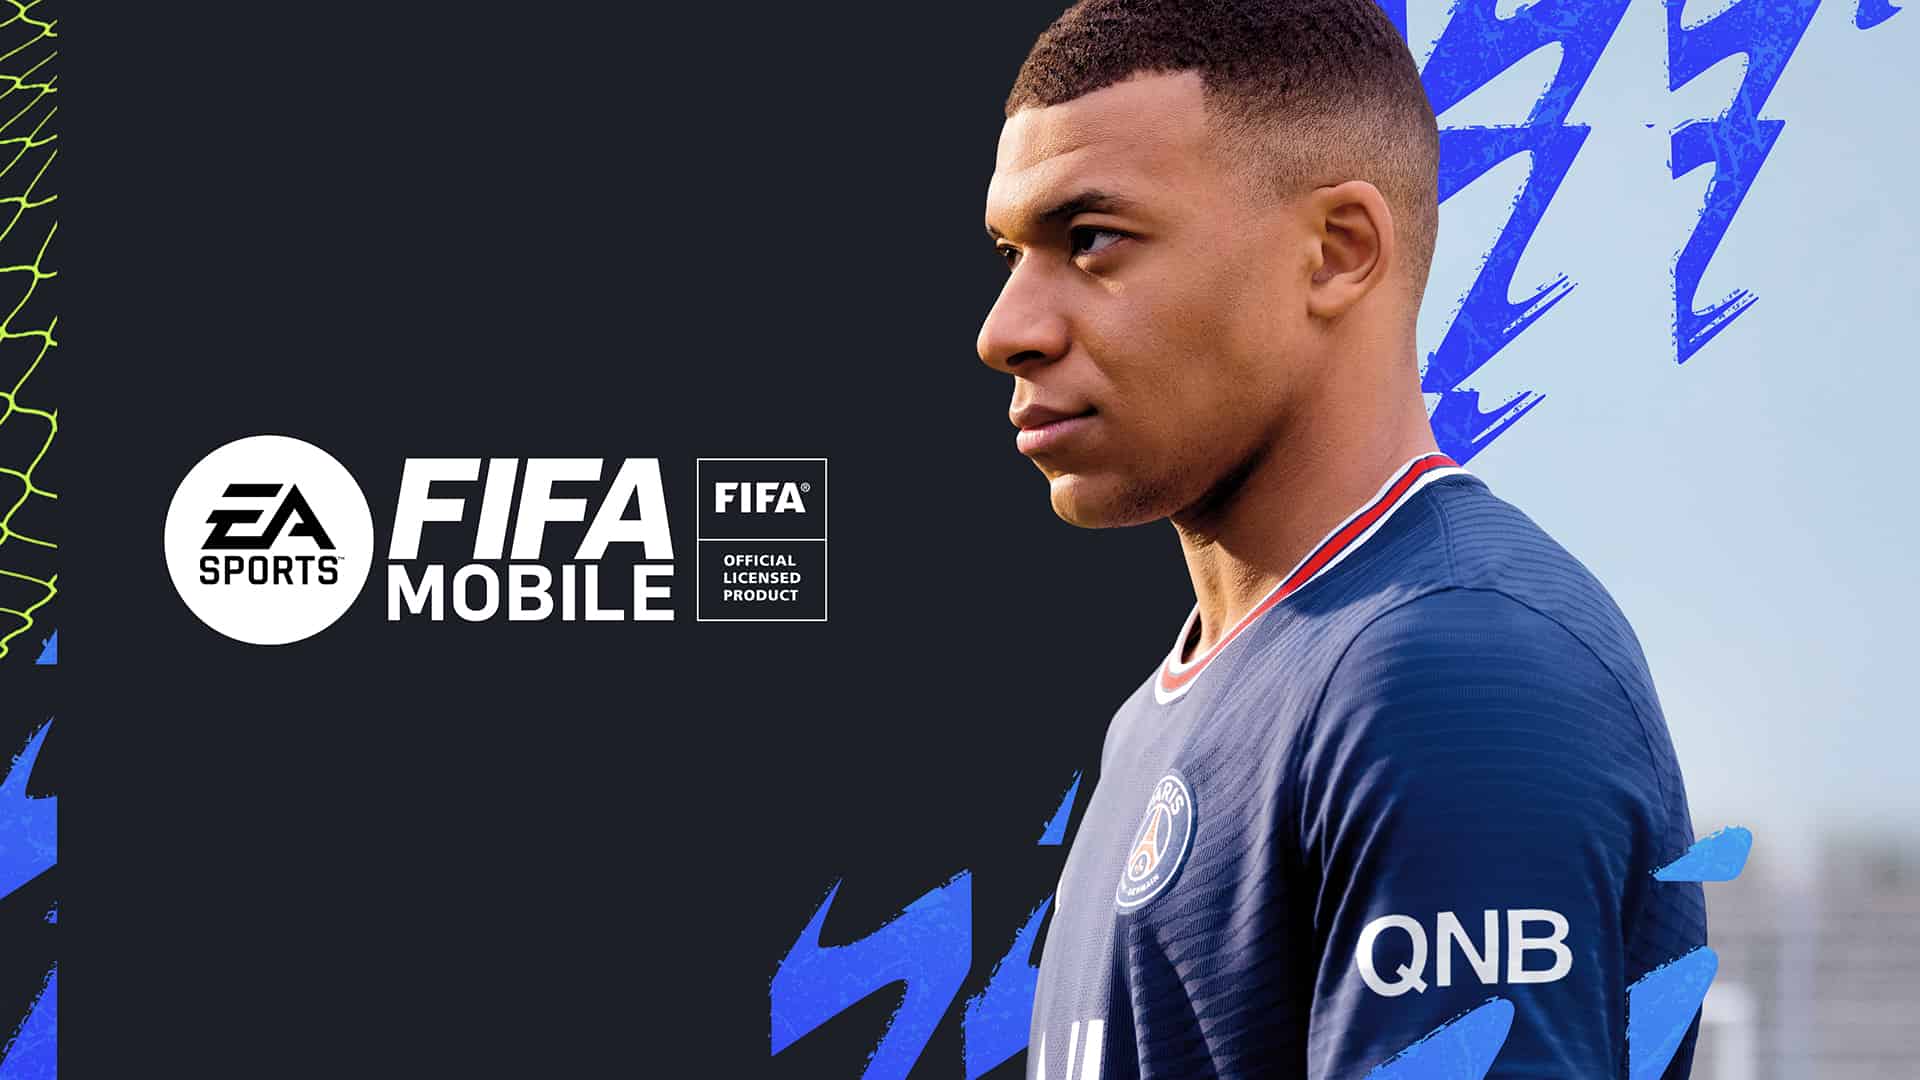 FIFA Mobile New Update 17.1.01 is now available Release Notes